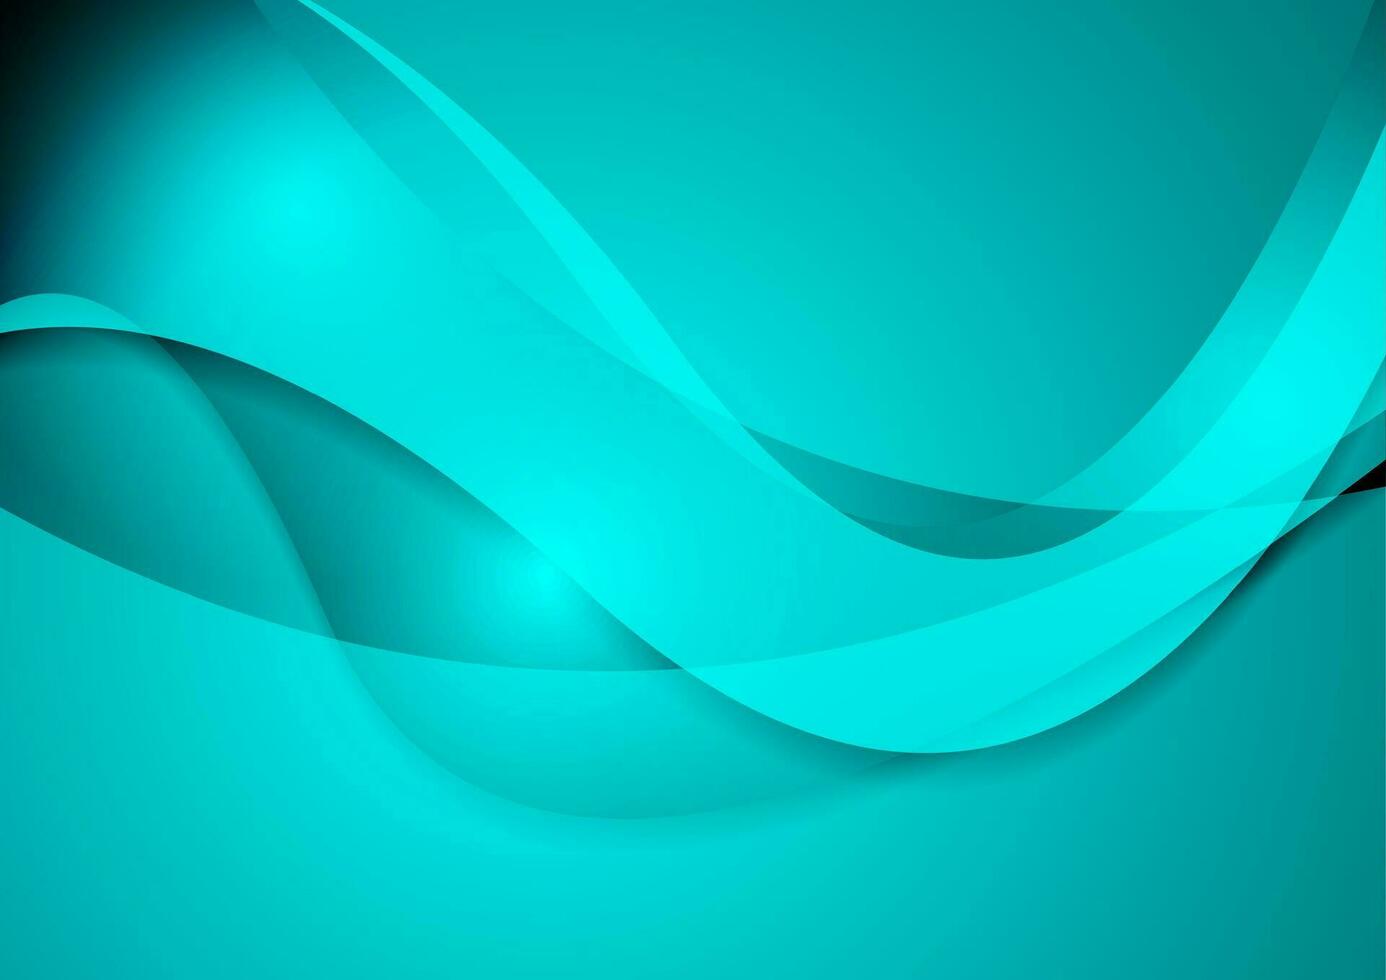 Bright abstract turquoise wavy corporate background vector